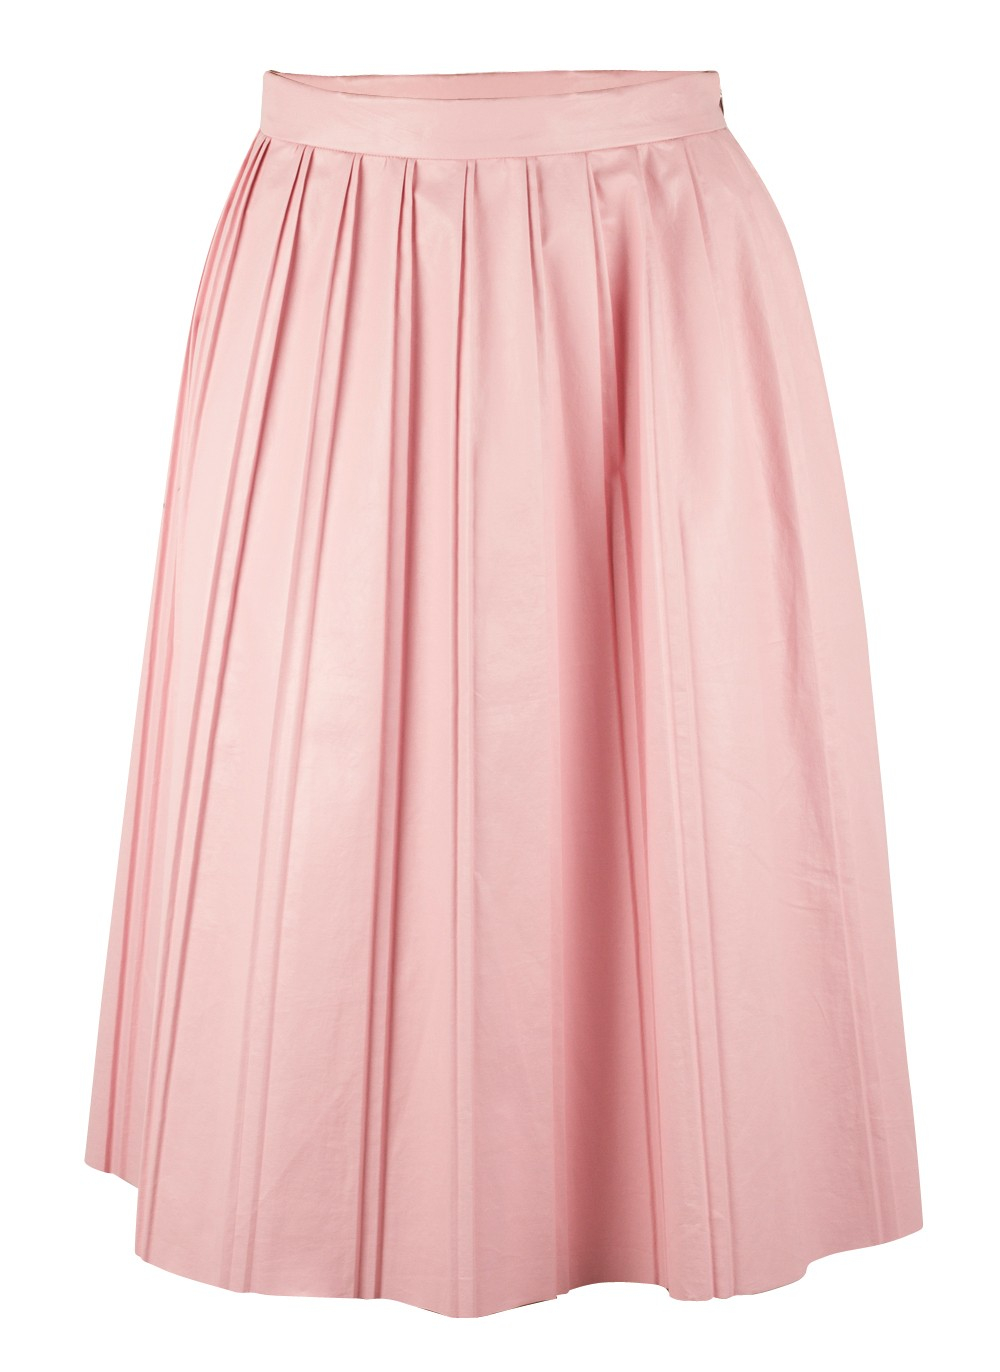 Suno Pleated Faux Leather Skirt in Pink